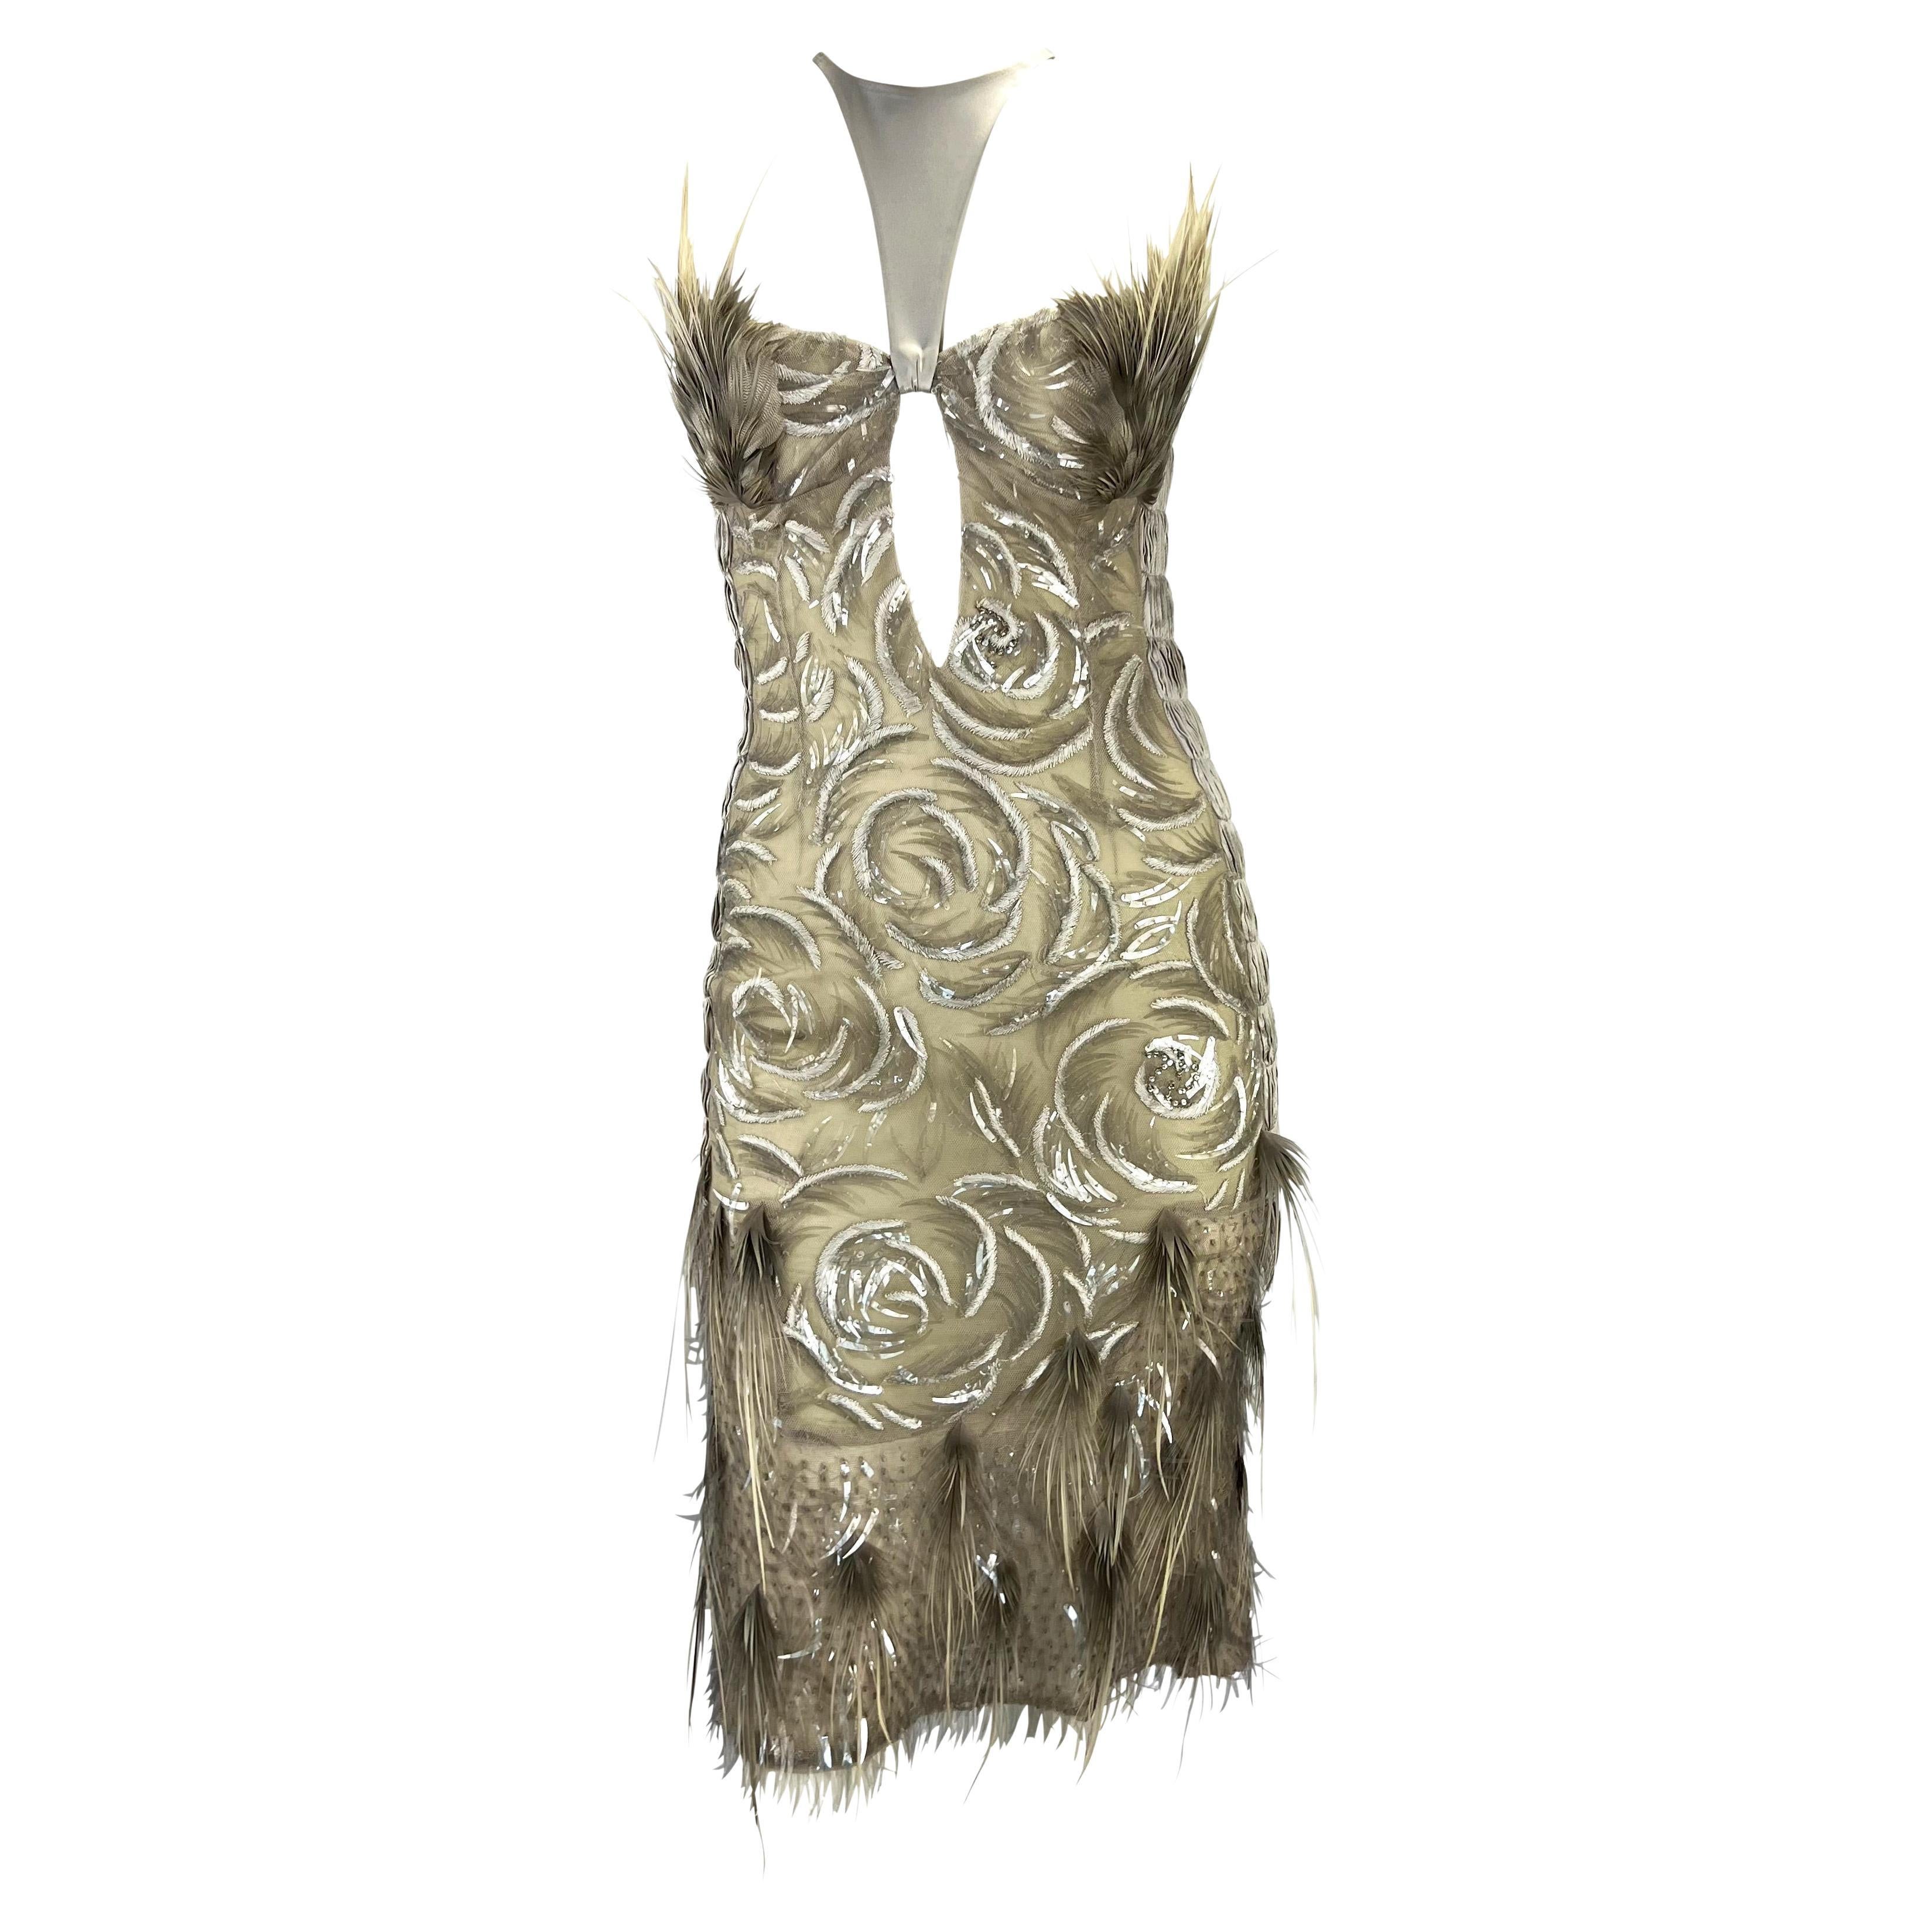 S/S 2004 Gucci by Tom Ford Feather Rhinestone Silver Silk Backless Dress